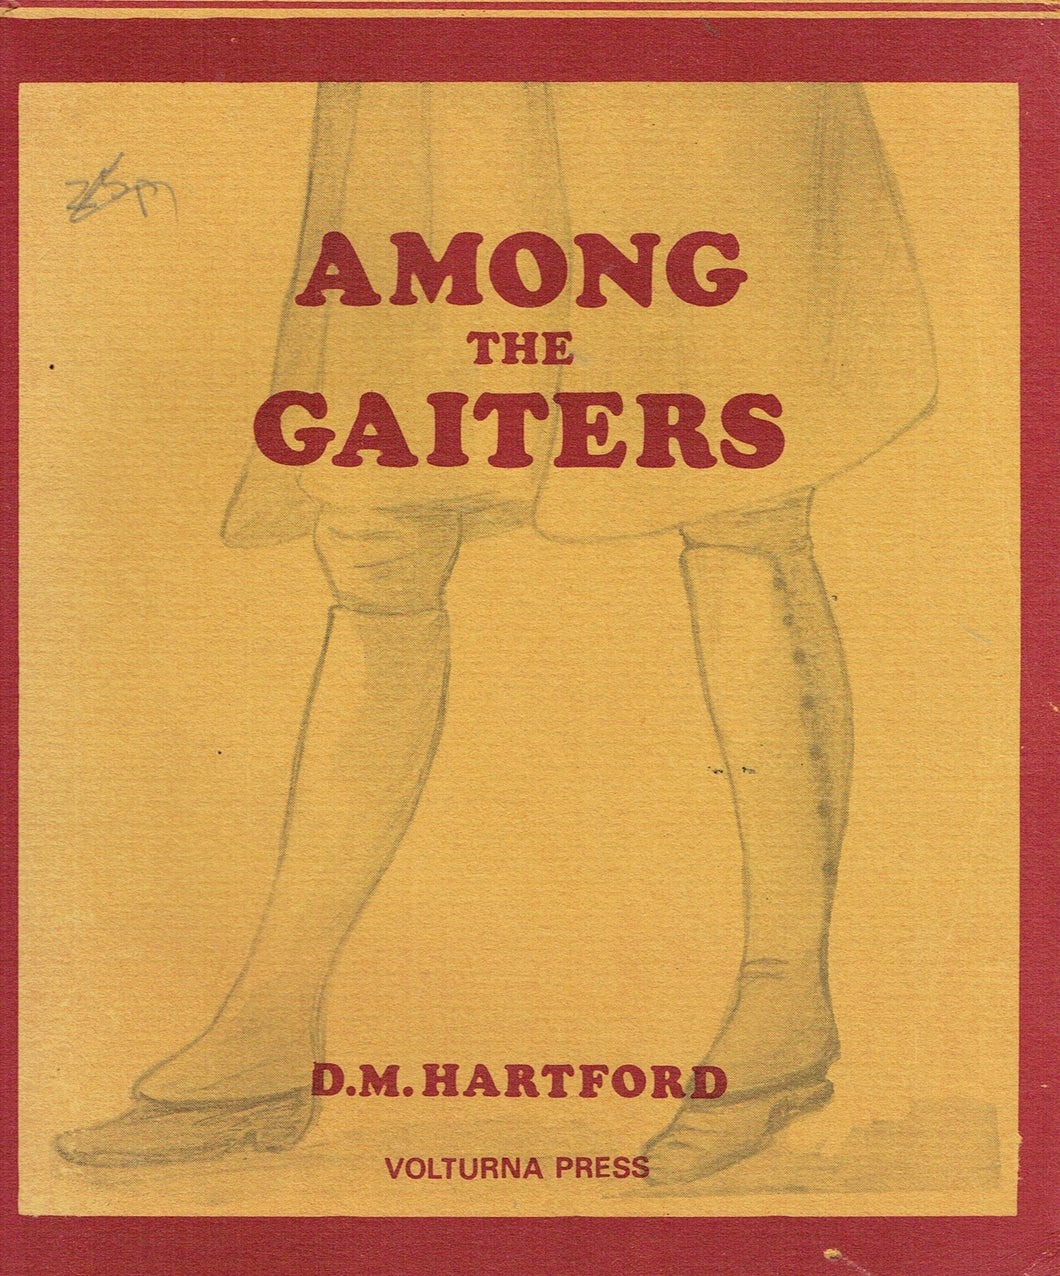 Among the Gaiters